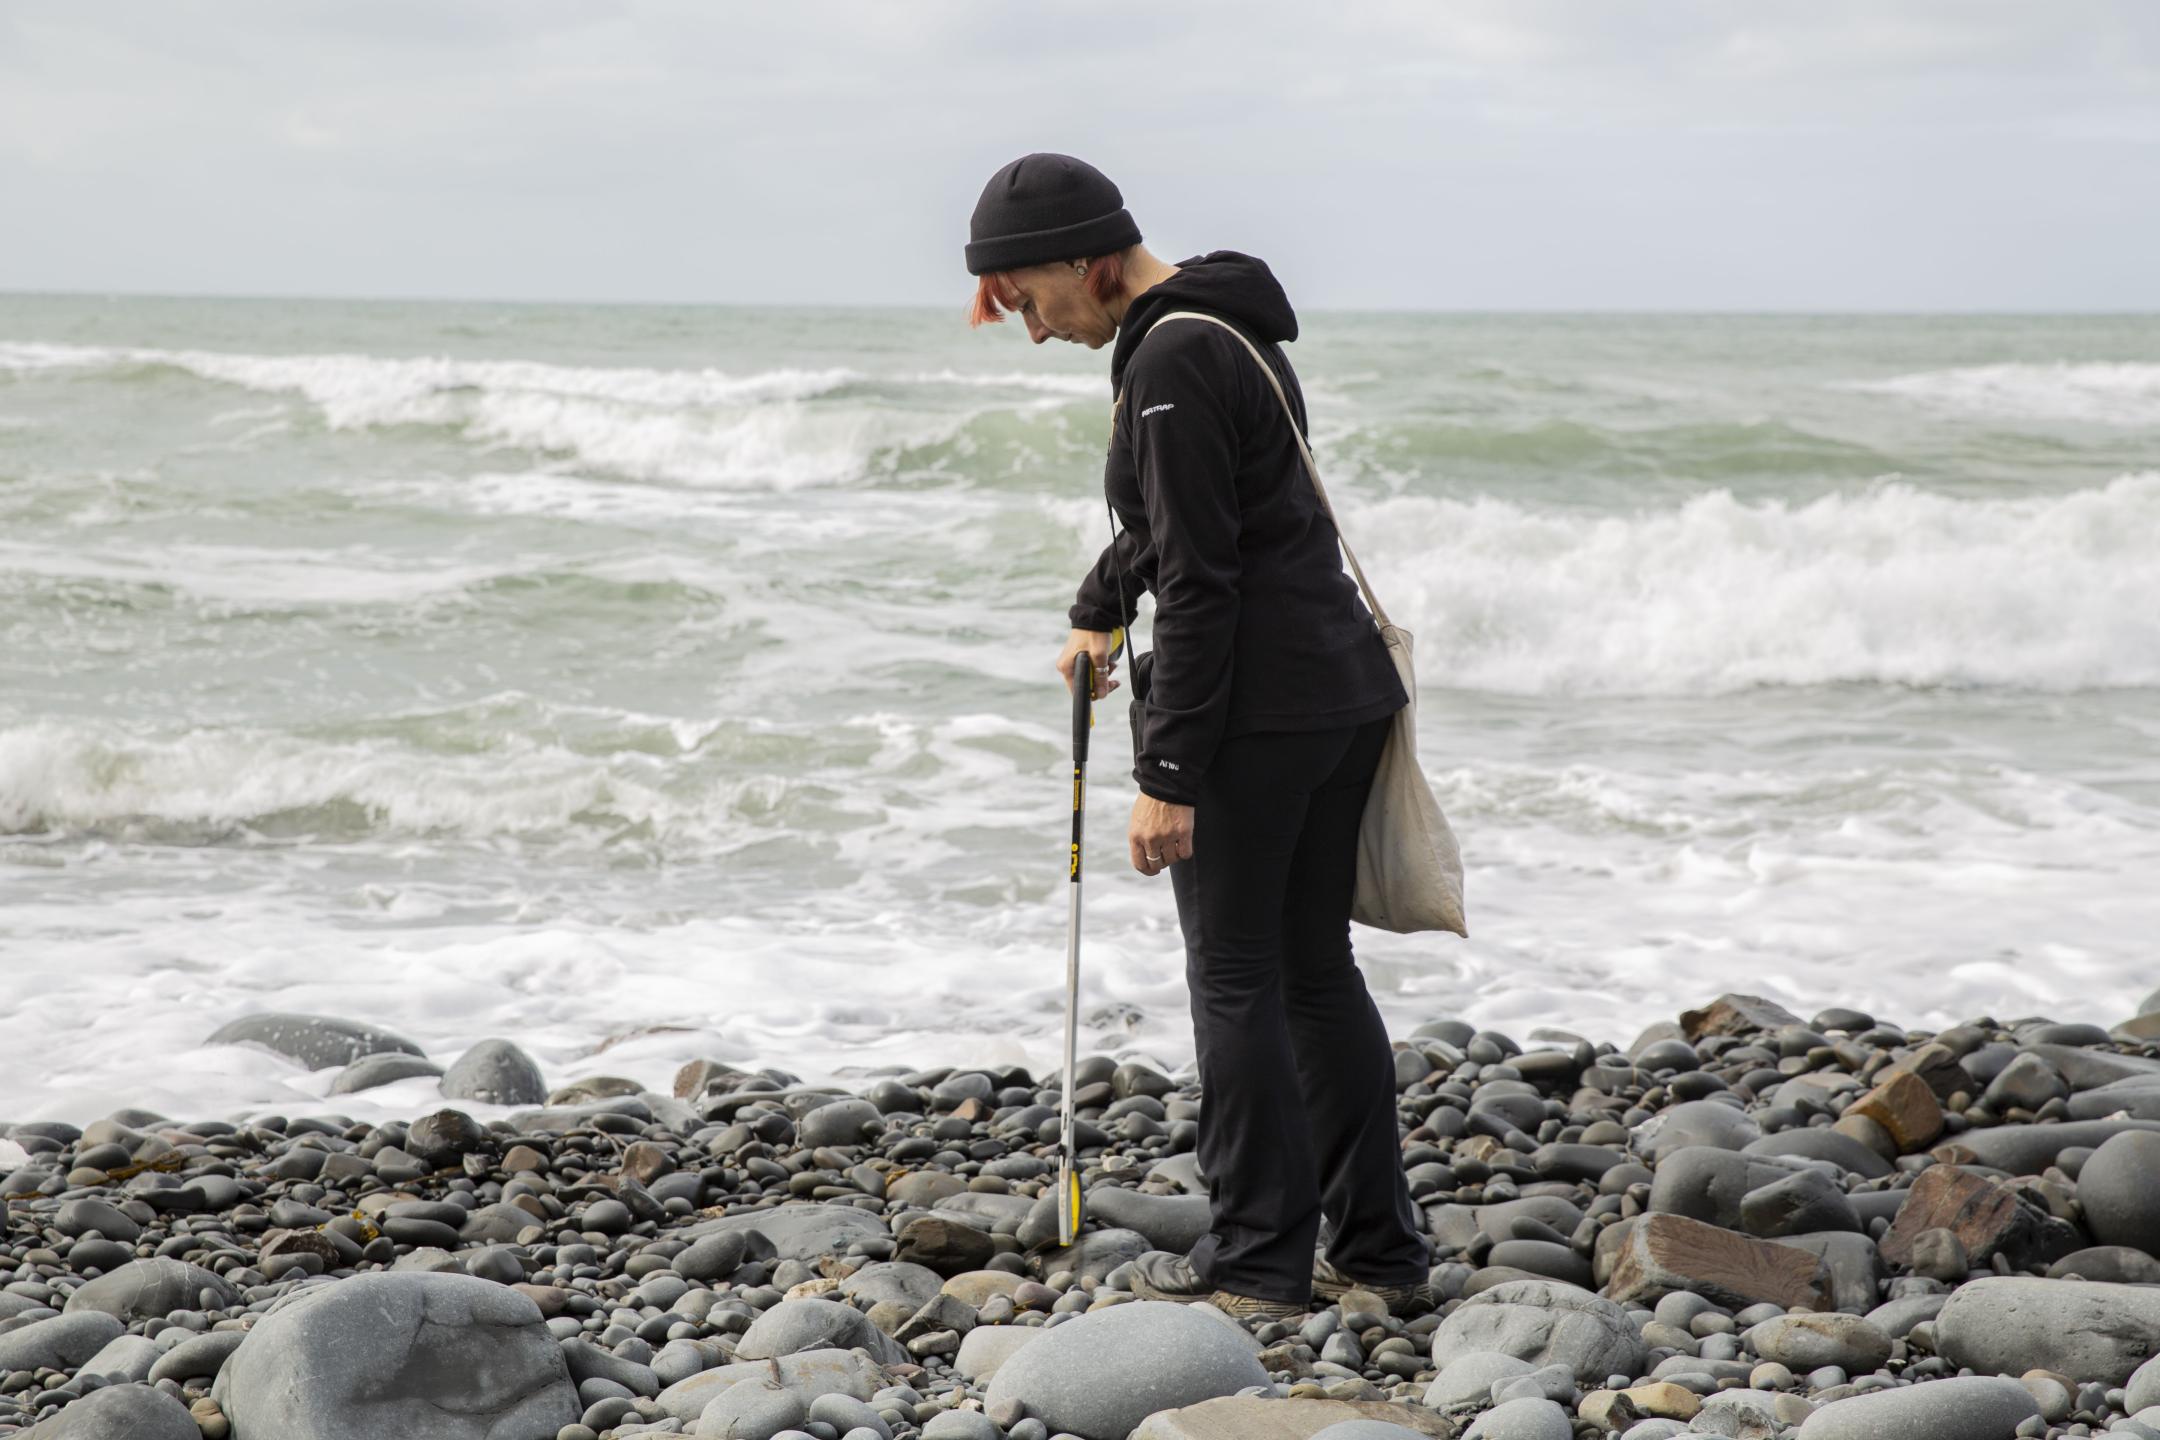 A woman is walking at a rocky beach. She looks down and picks something up with a long gripper.